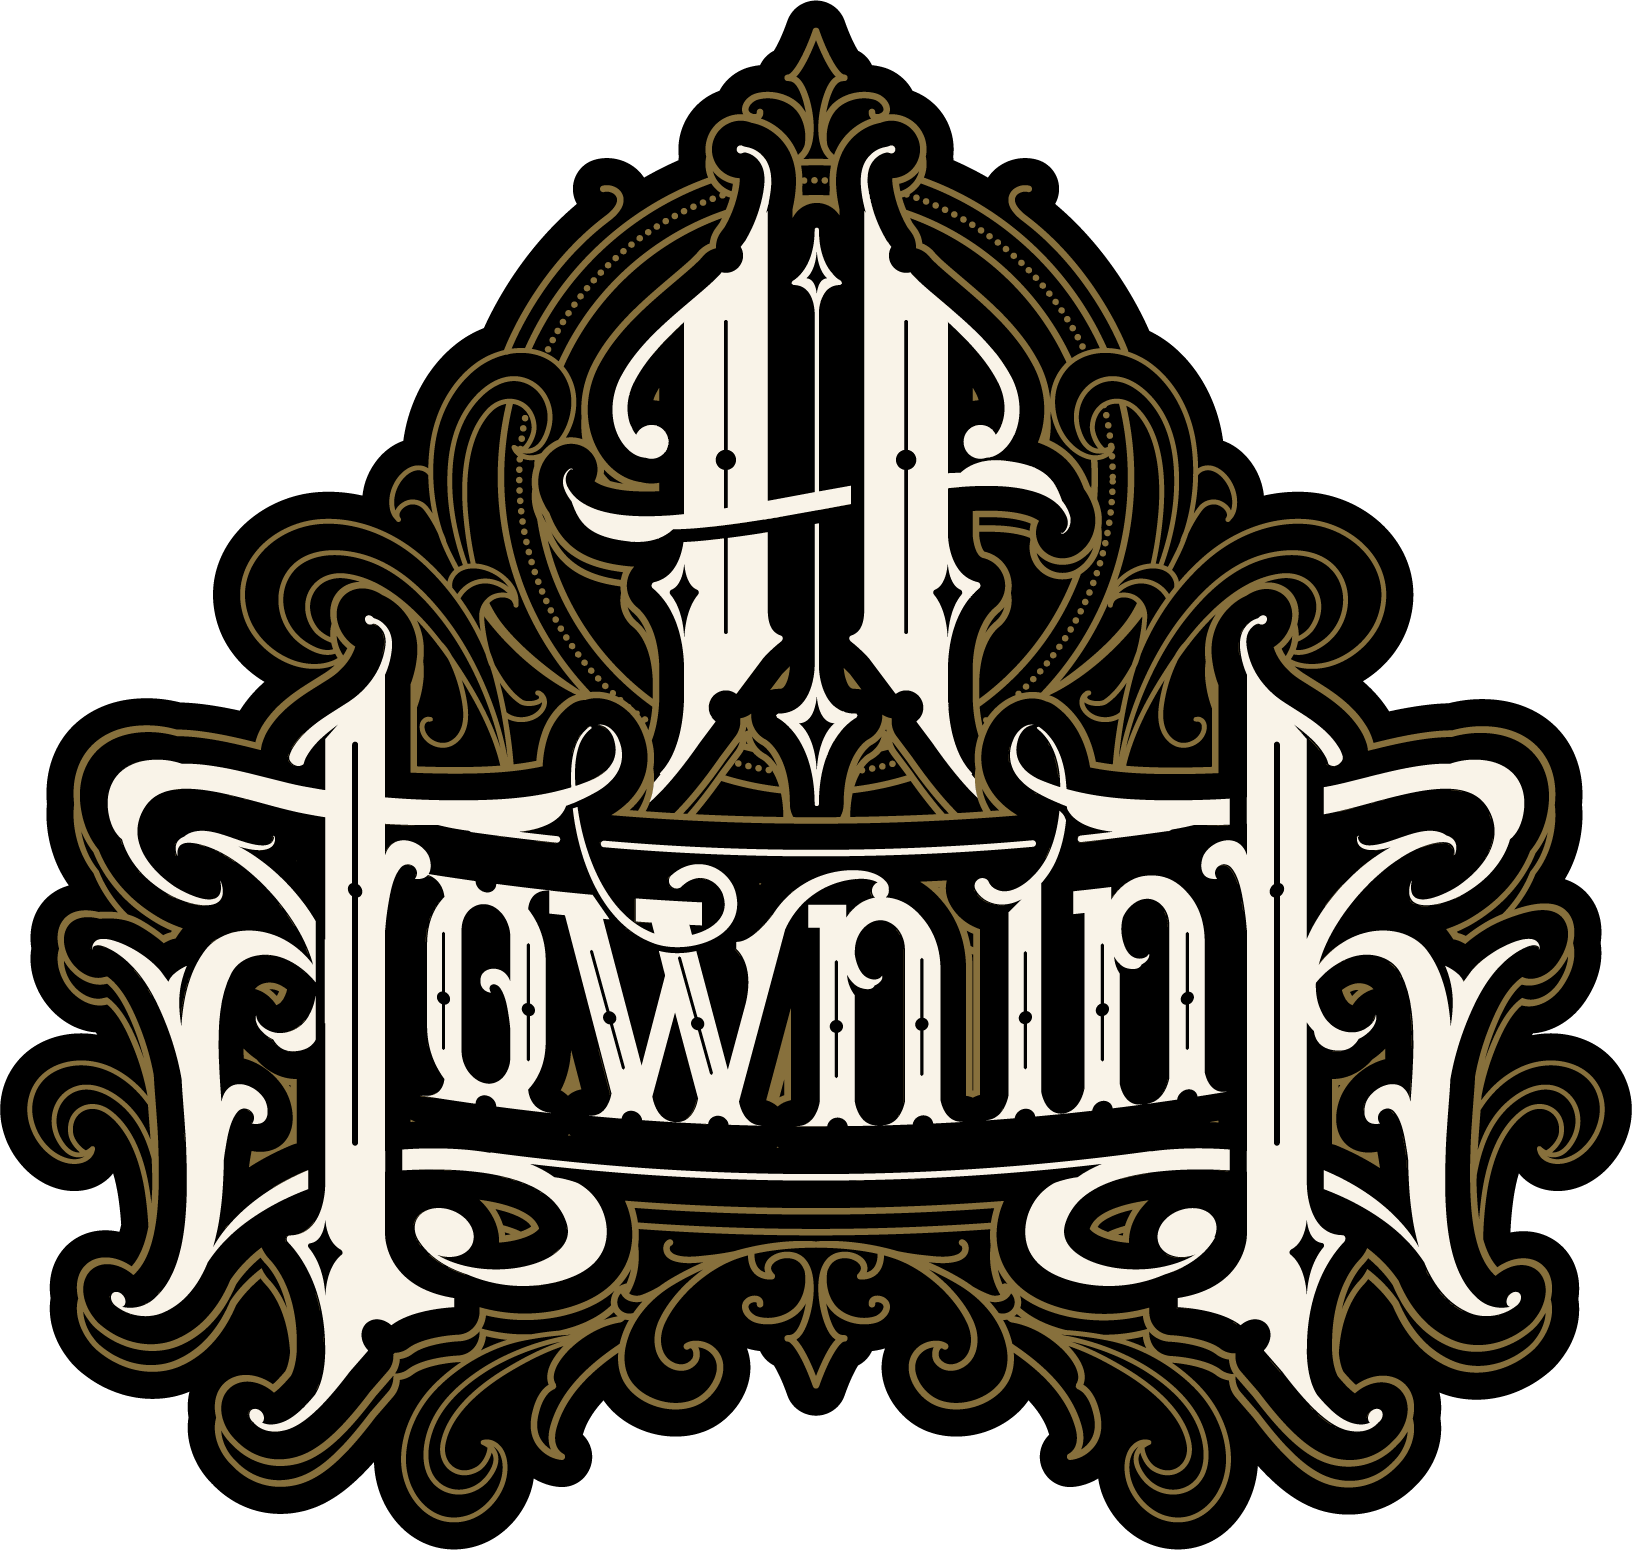 H-Town Ink